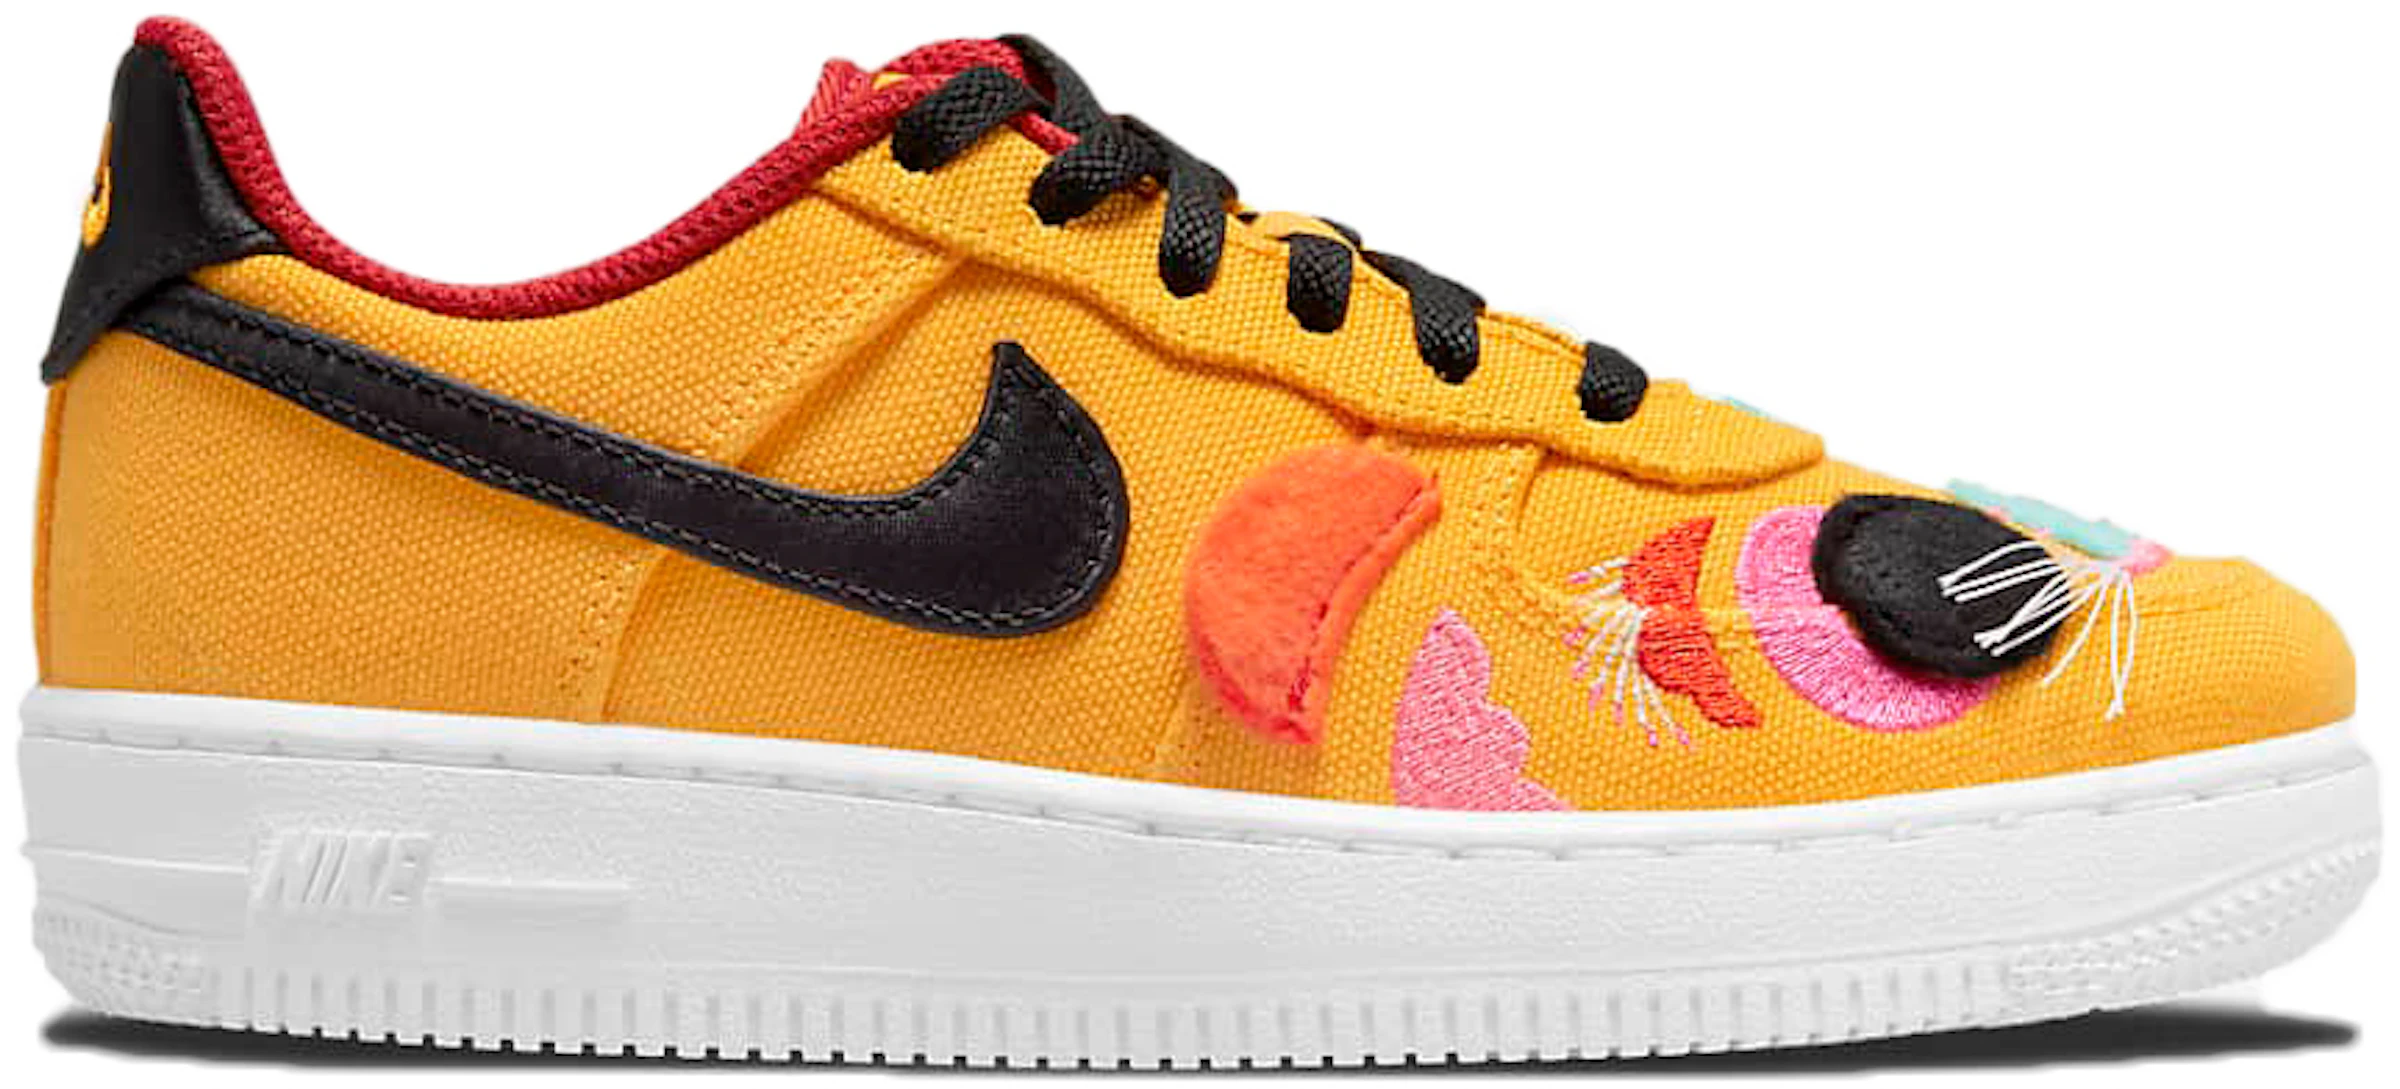 Picotear Desalentar Impuestos Nike Air Force 1 Low 07 LV8 Chinese New Year University Gold (PS) -  DQ5071-701 - US